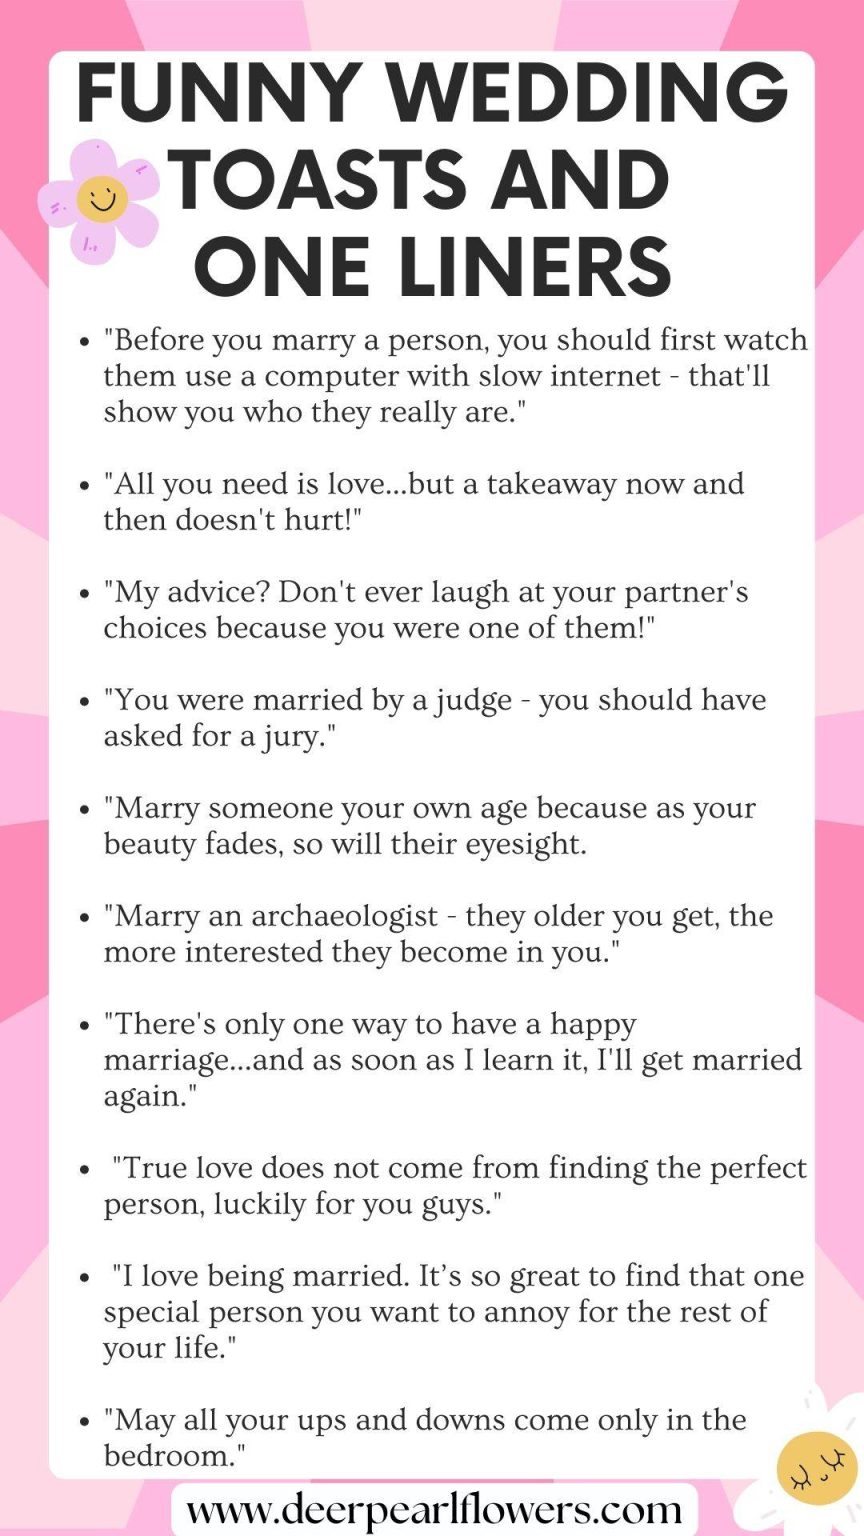 Funny Wedding Toasts And One Liners 864x1536 